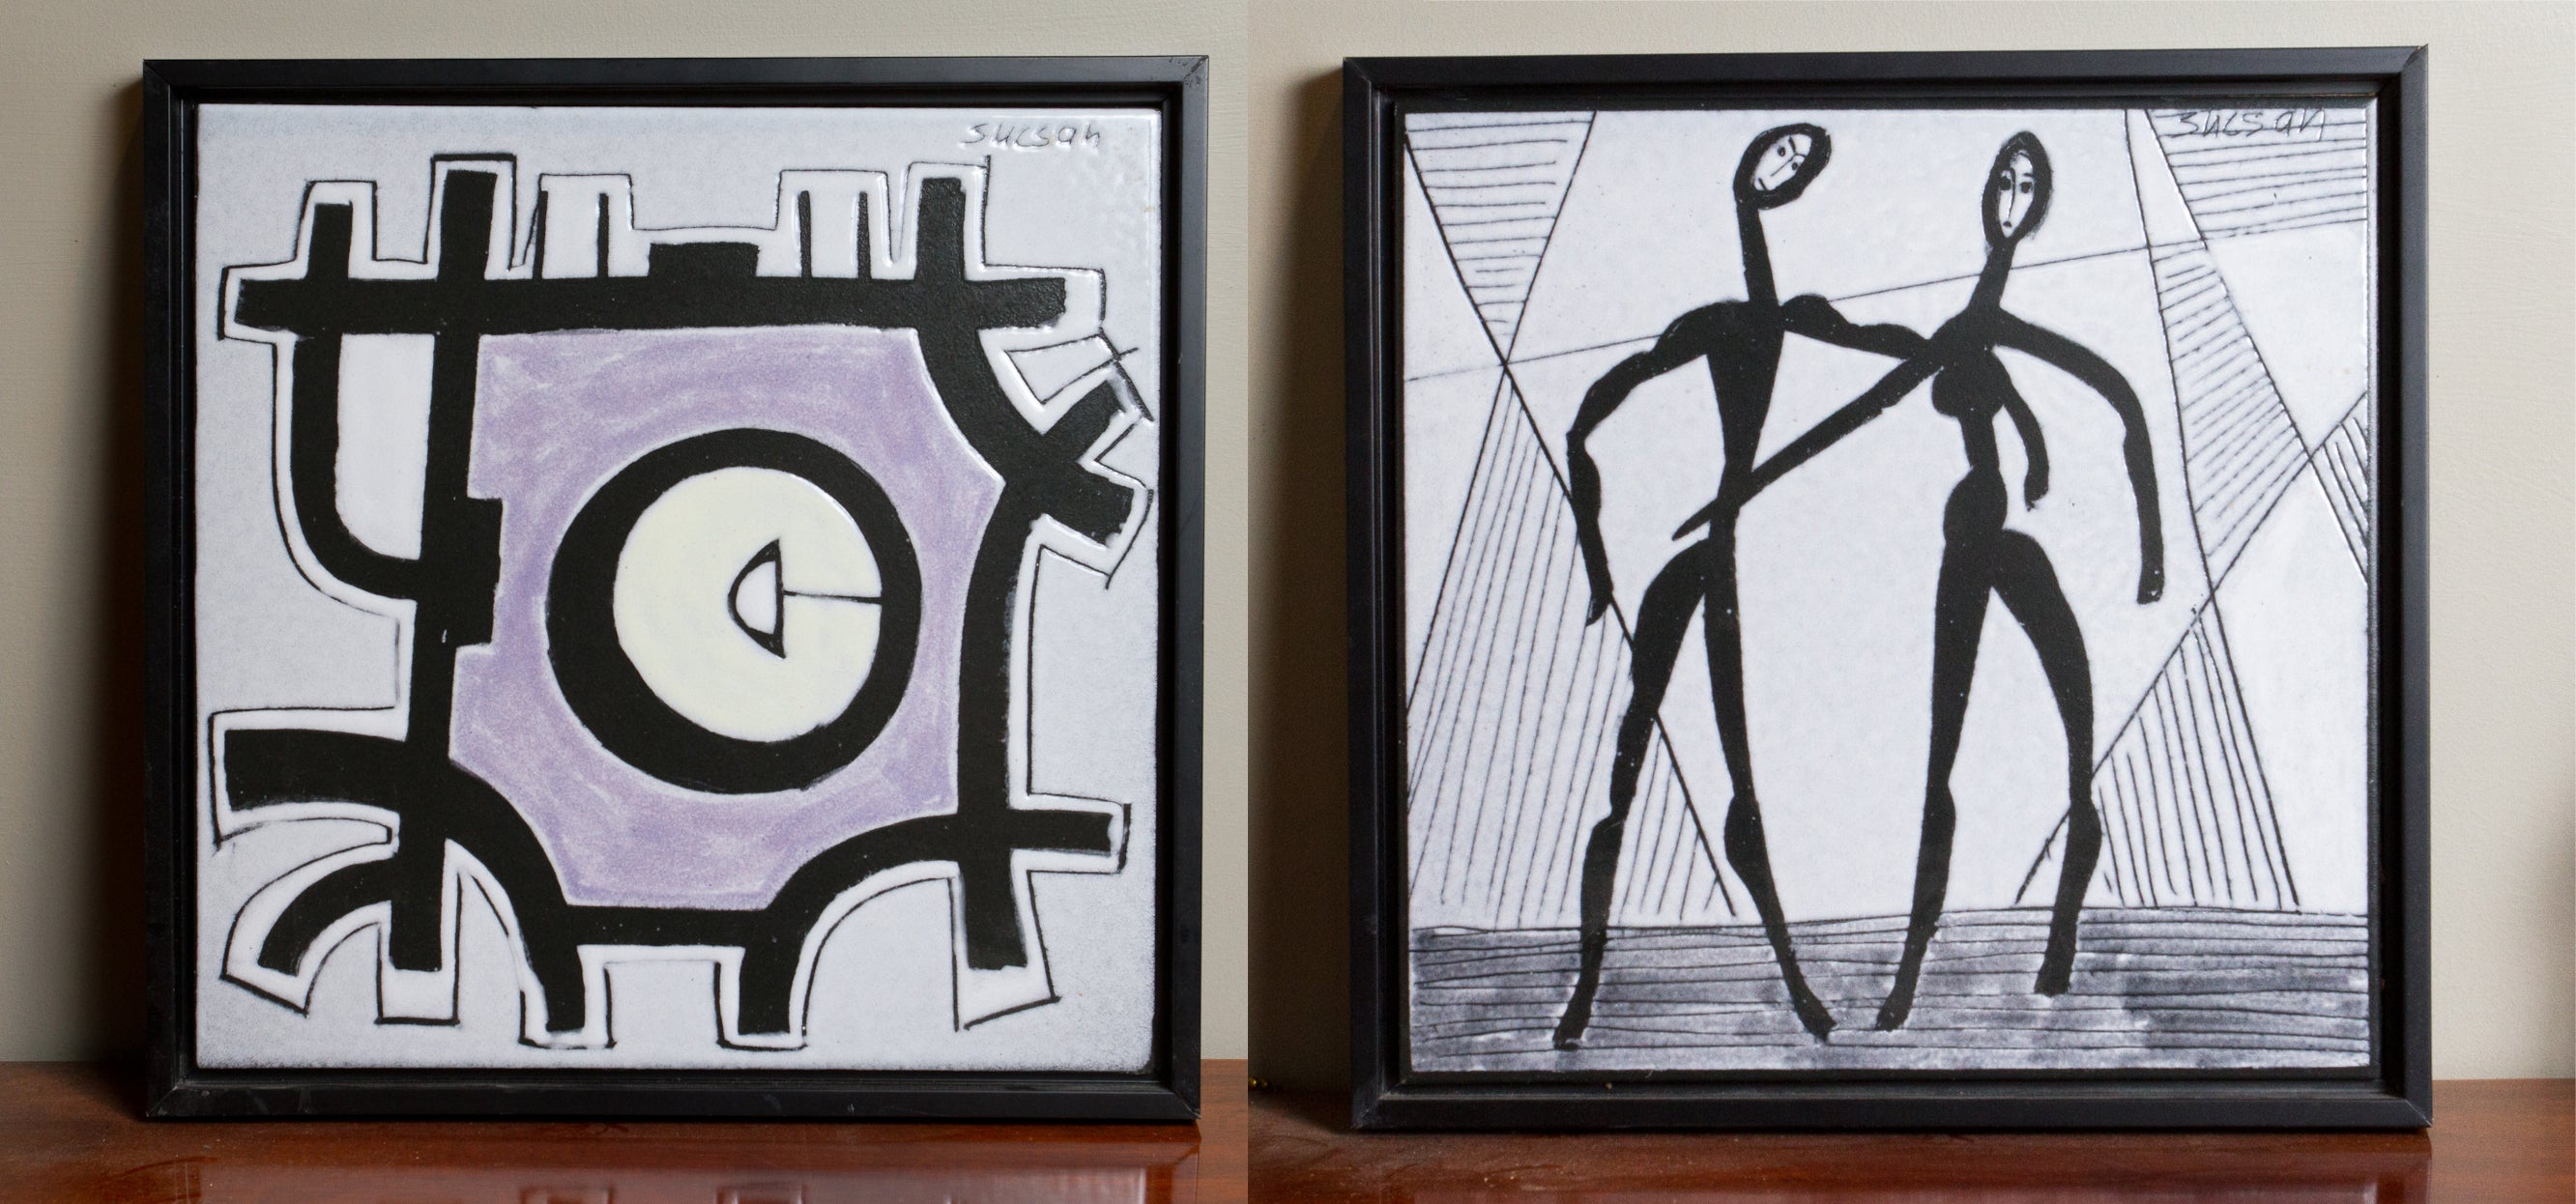 Pair Of Ceramic Plaques by Charles Sucsan